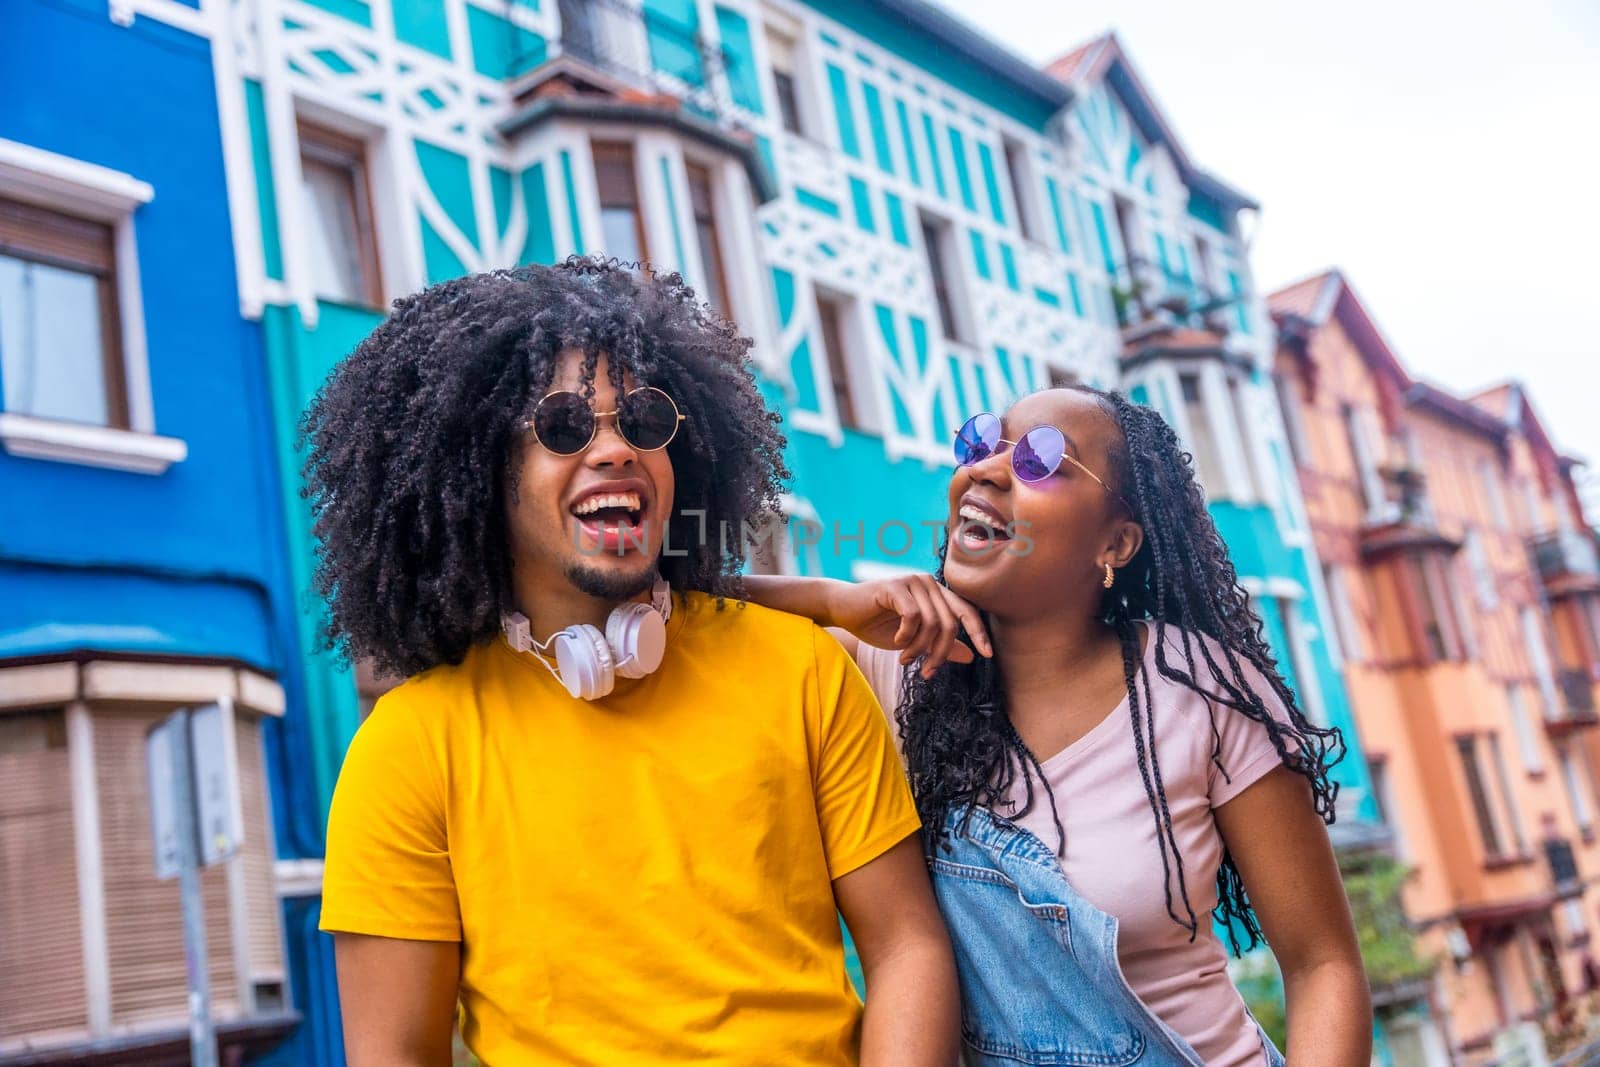 Happy african cool friends with sunglasses and denim casual clothes laughing and chatting in a colorful street